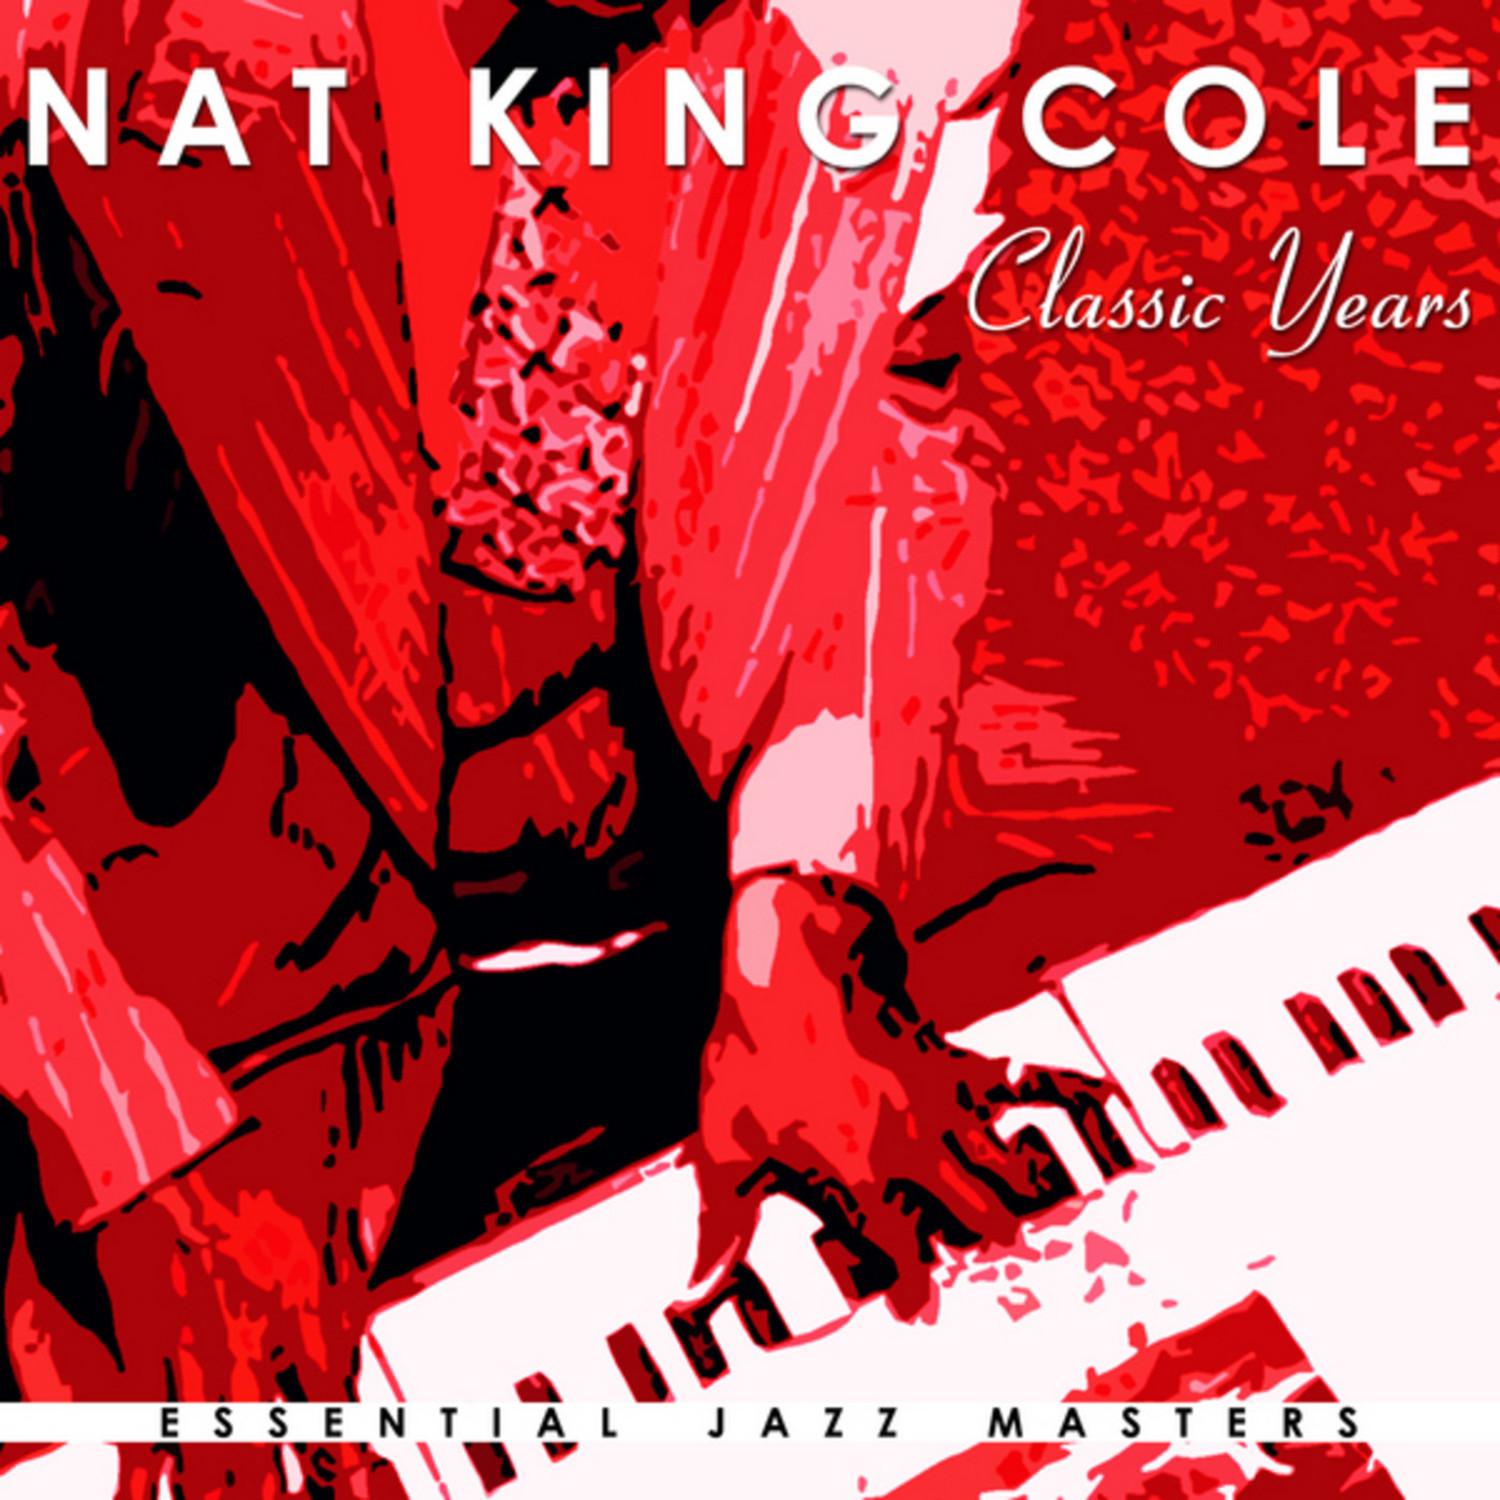 The Classic Years of Nat King Cole